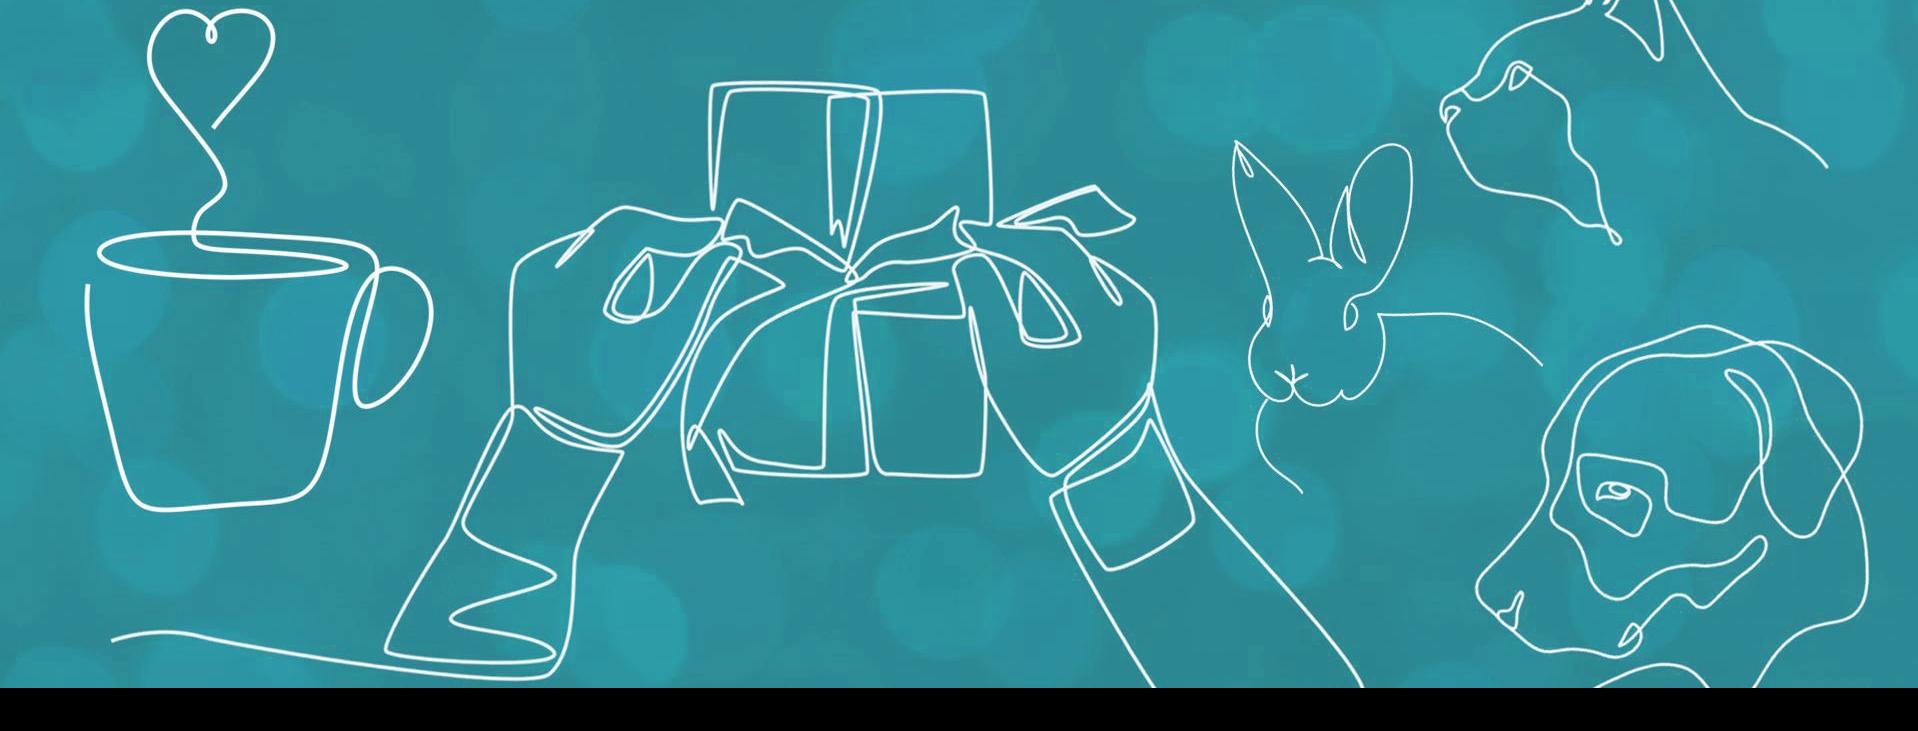 Line art of a warm beverage, dog, cat, rabbit and hands wrapping a gift on green